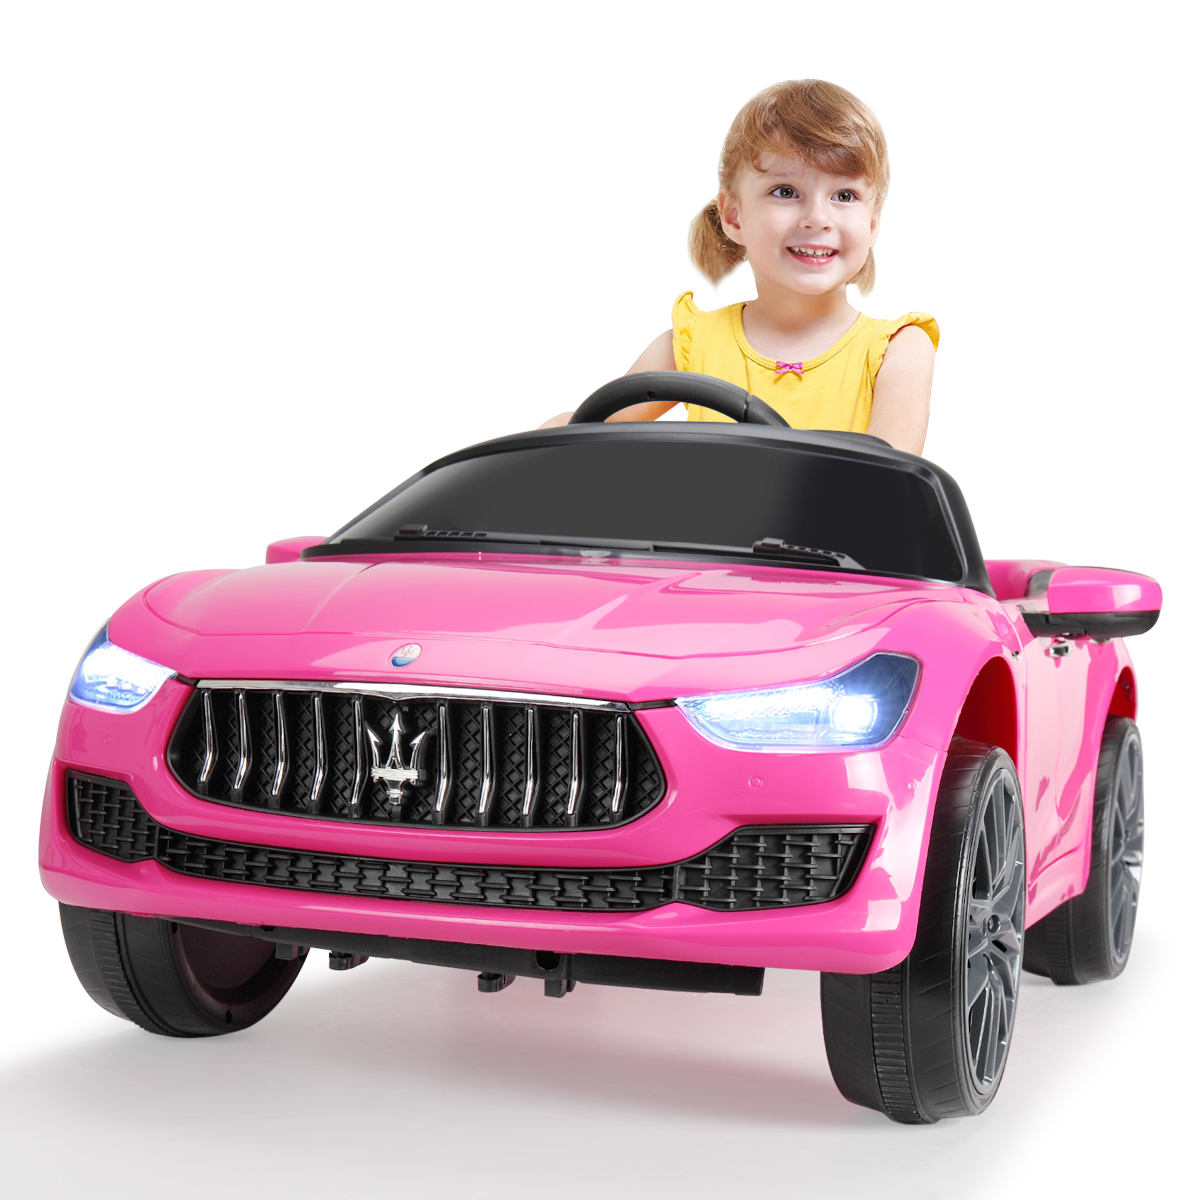 Tobbi 12V Maserati Kid Ride on Car with Parental Remote Control, Licensed Electric Ride on Toy Vehicle w/ Music, LED Lights,for 3-8